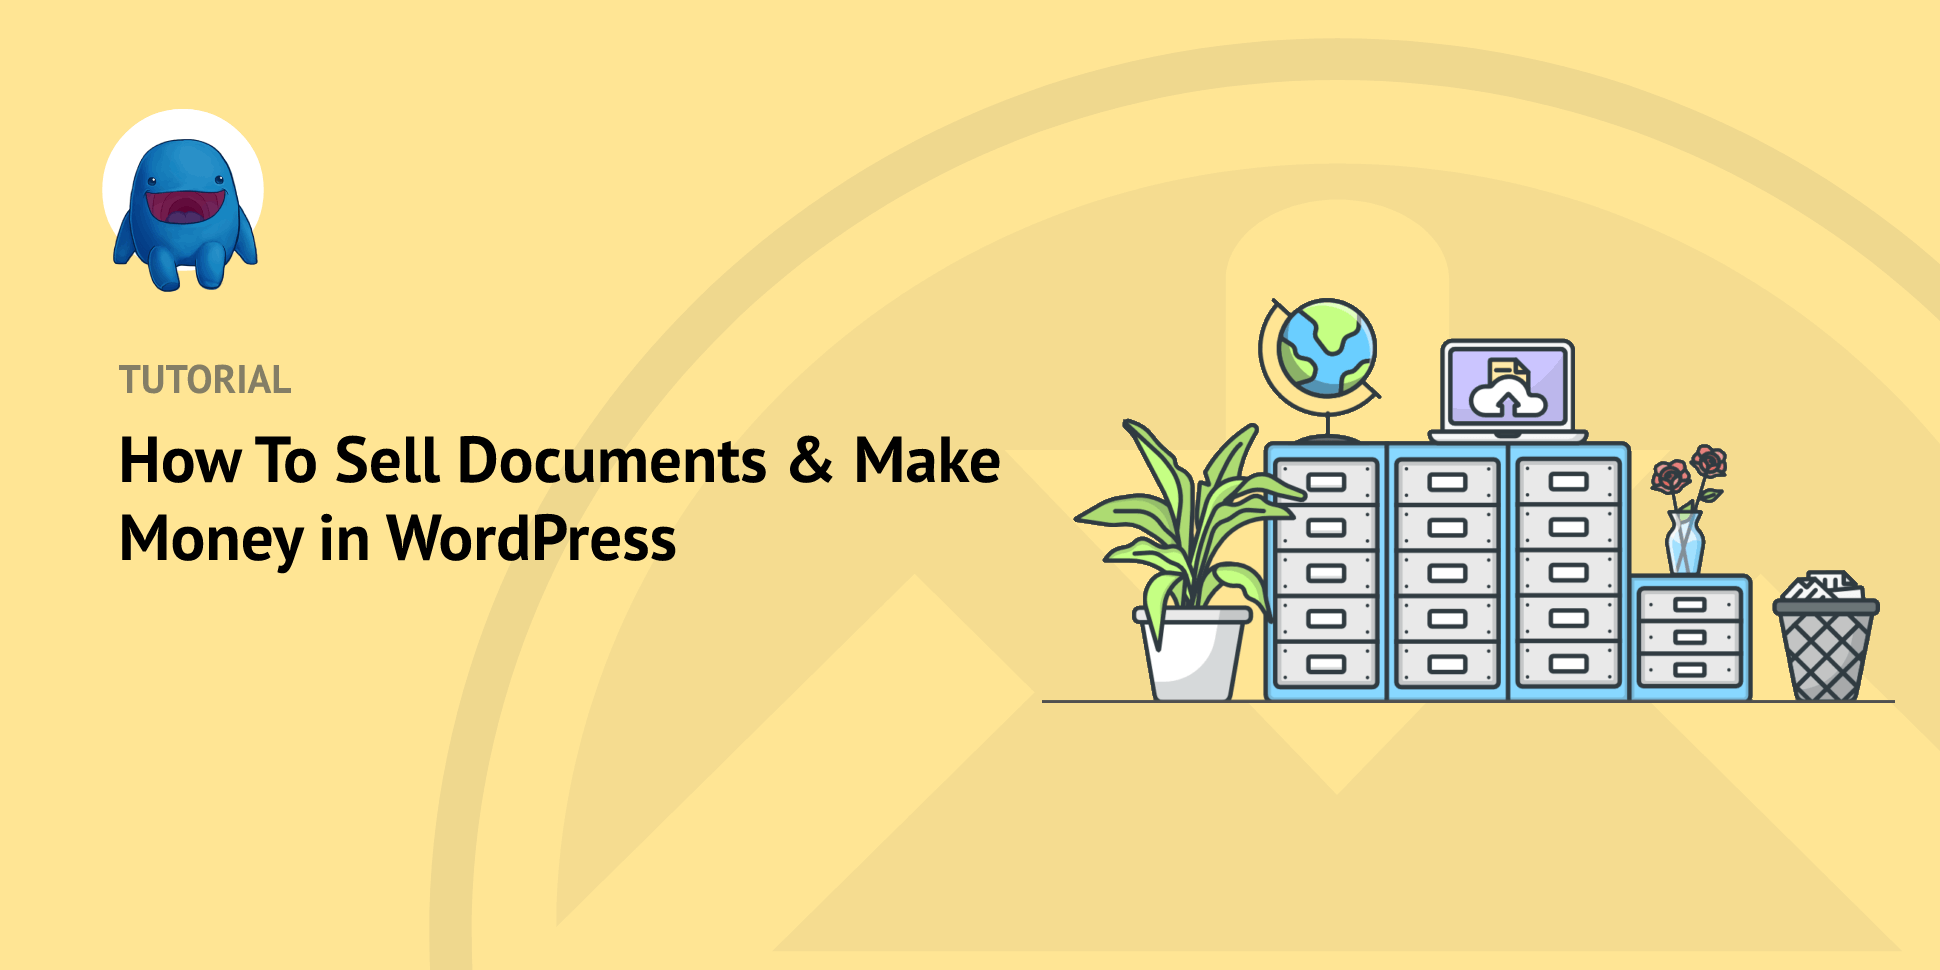 How to Sell Documents and Make Money in WordPress